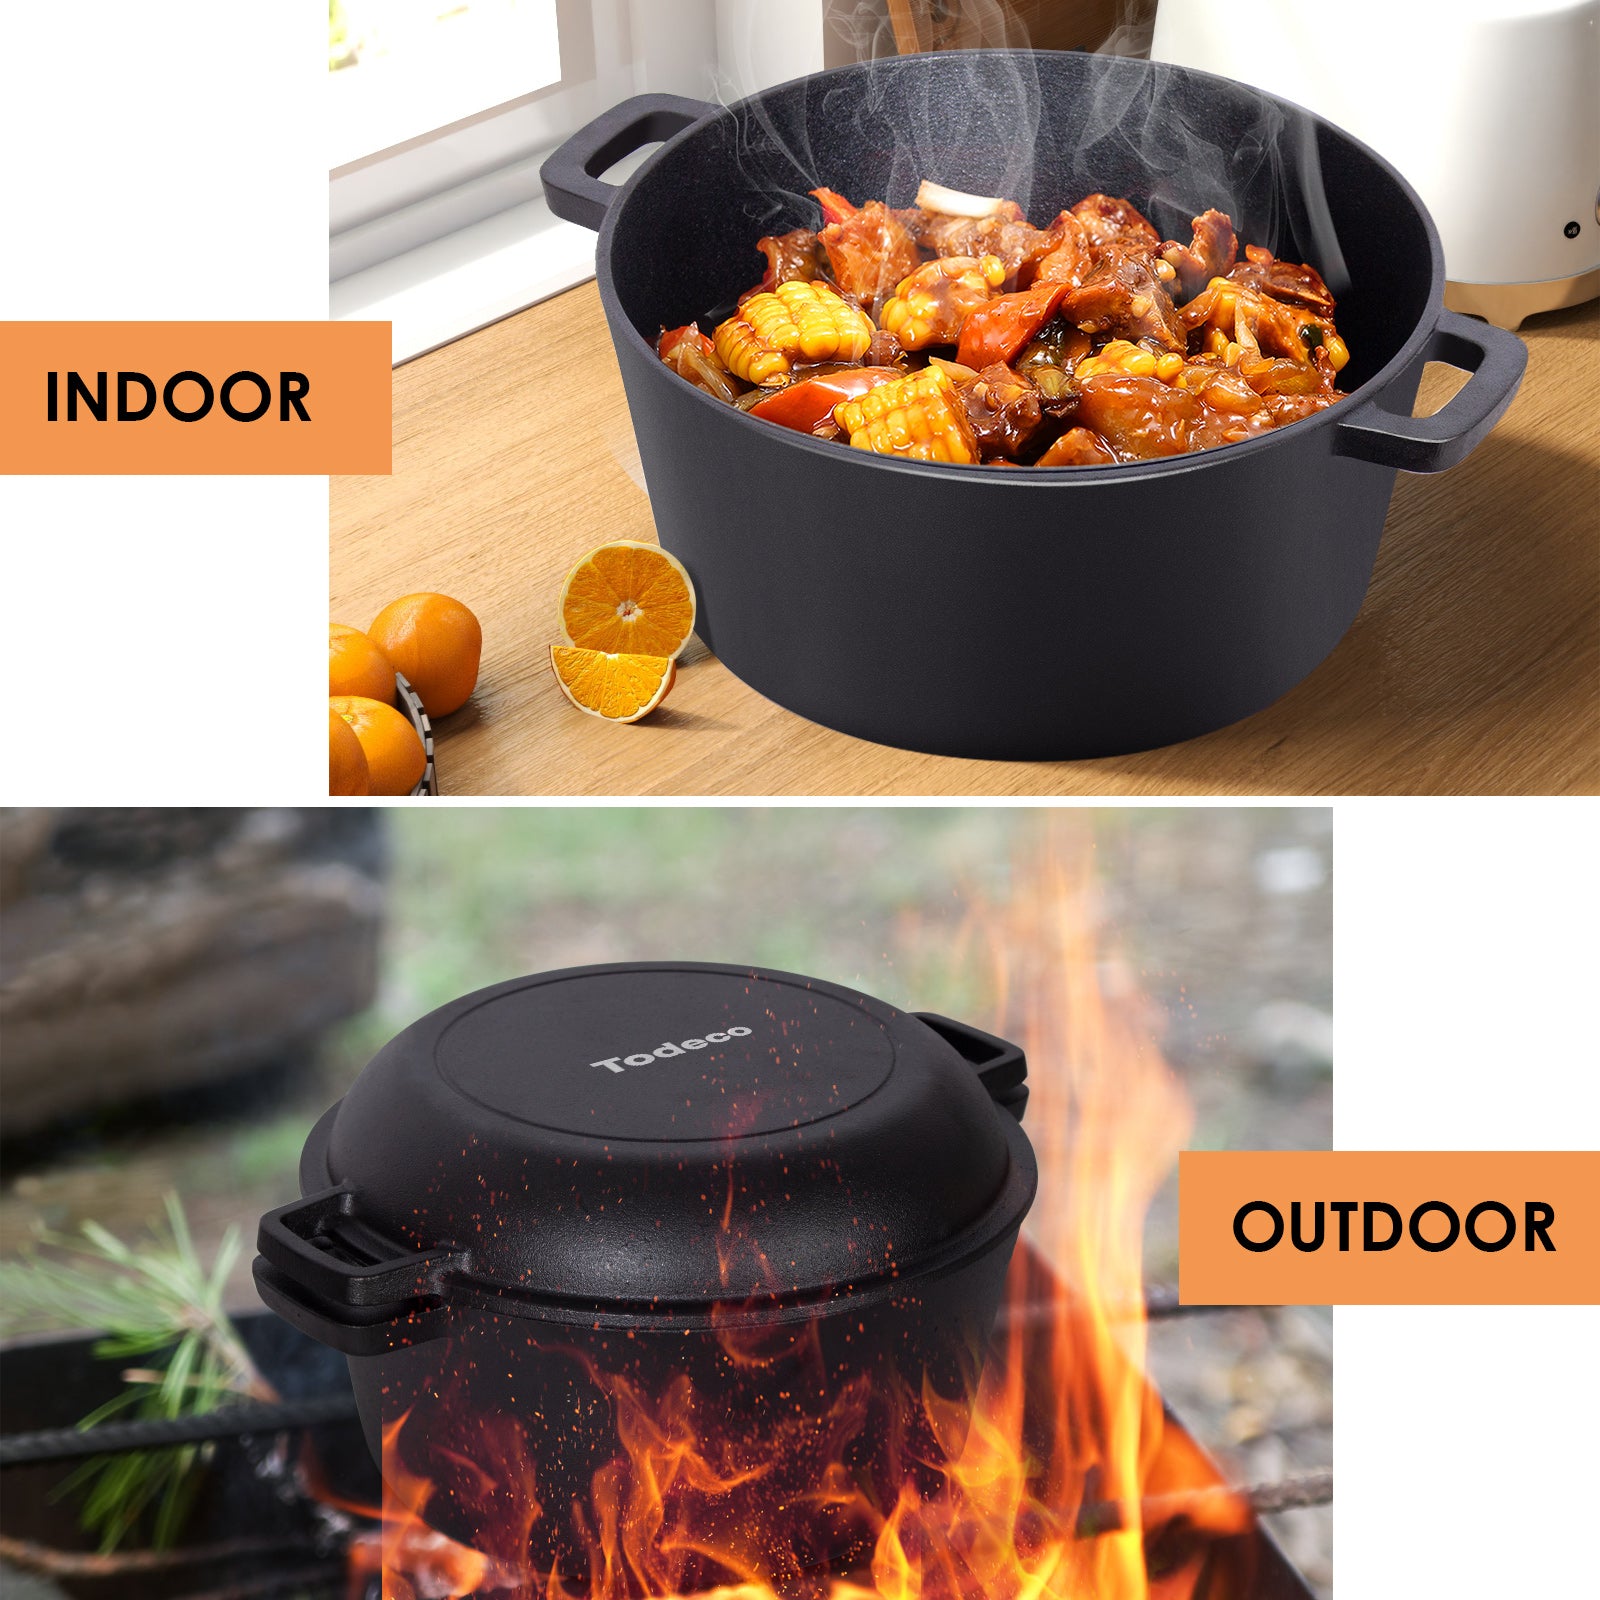 2-in-1-Cast-Iron-Pot-with-Pan-Lid-5L-Dual-Function-Cast-Iron-Saucepan-Frying-Pan-Pre-Seasoned-Dutch-Oven-with-Recipe-for-Cooking-Camping-BBQ-Roasting-or-Braising-2-in-1-Cast-Iron-Pot-with-Pan-Lid